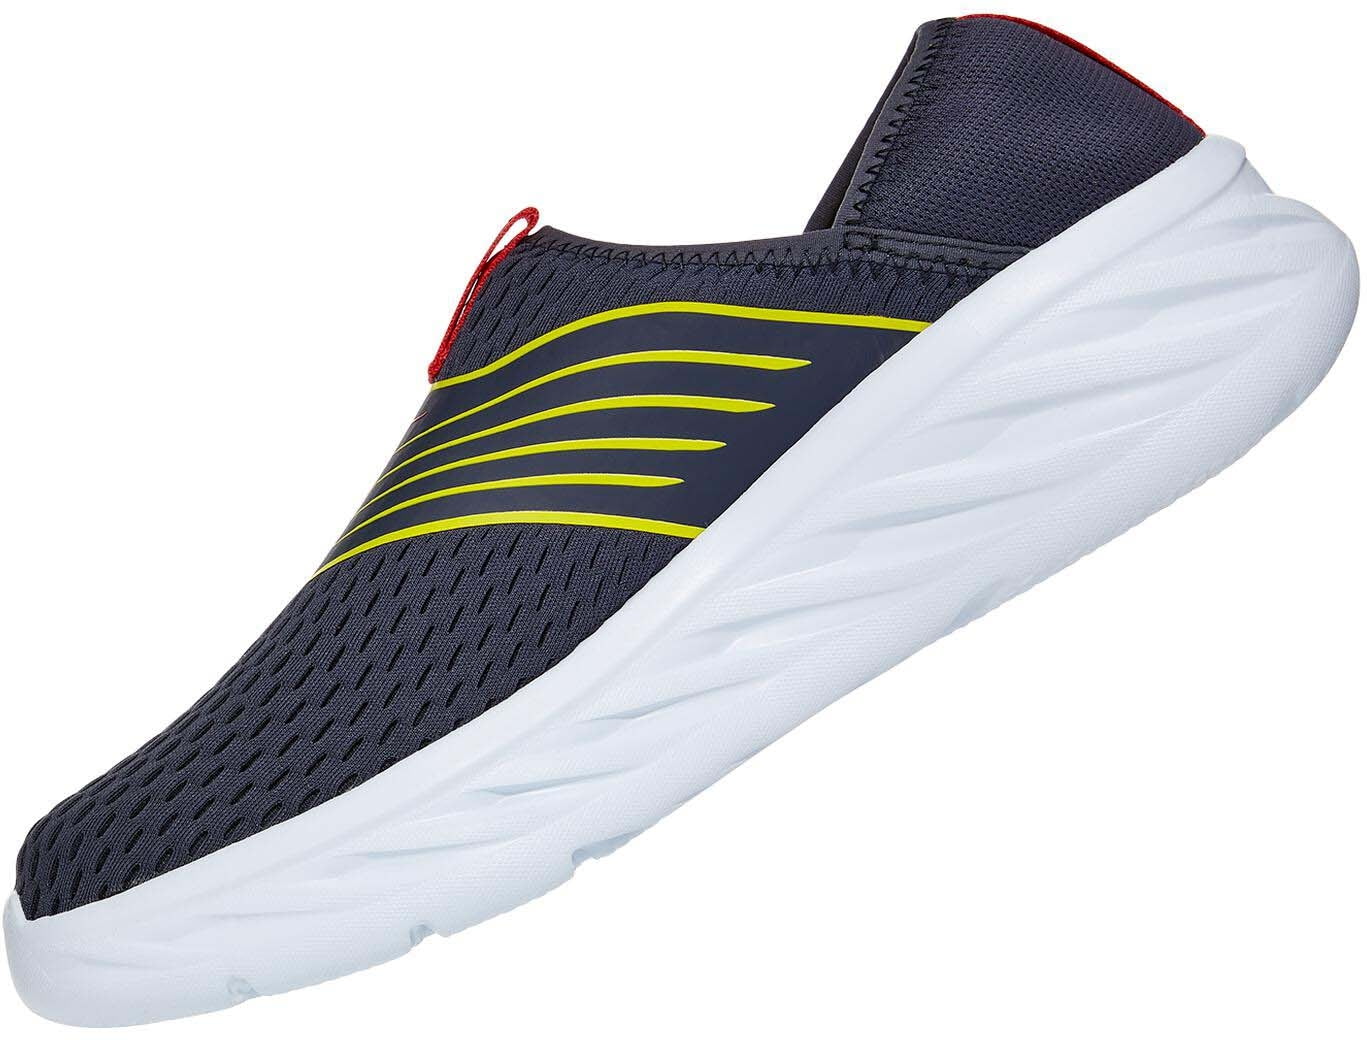 Hoka One One Ora Recovery Shoes Men's with Free S&H